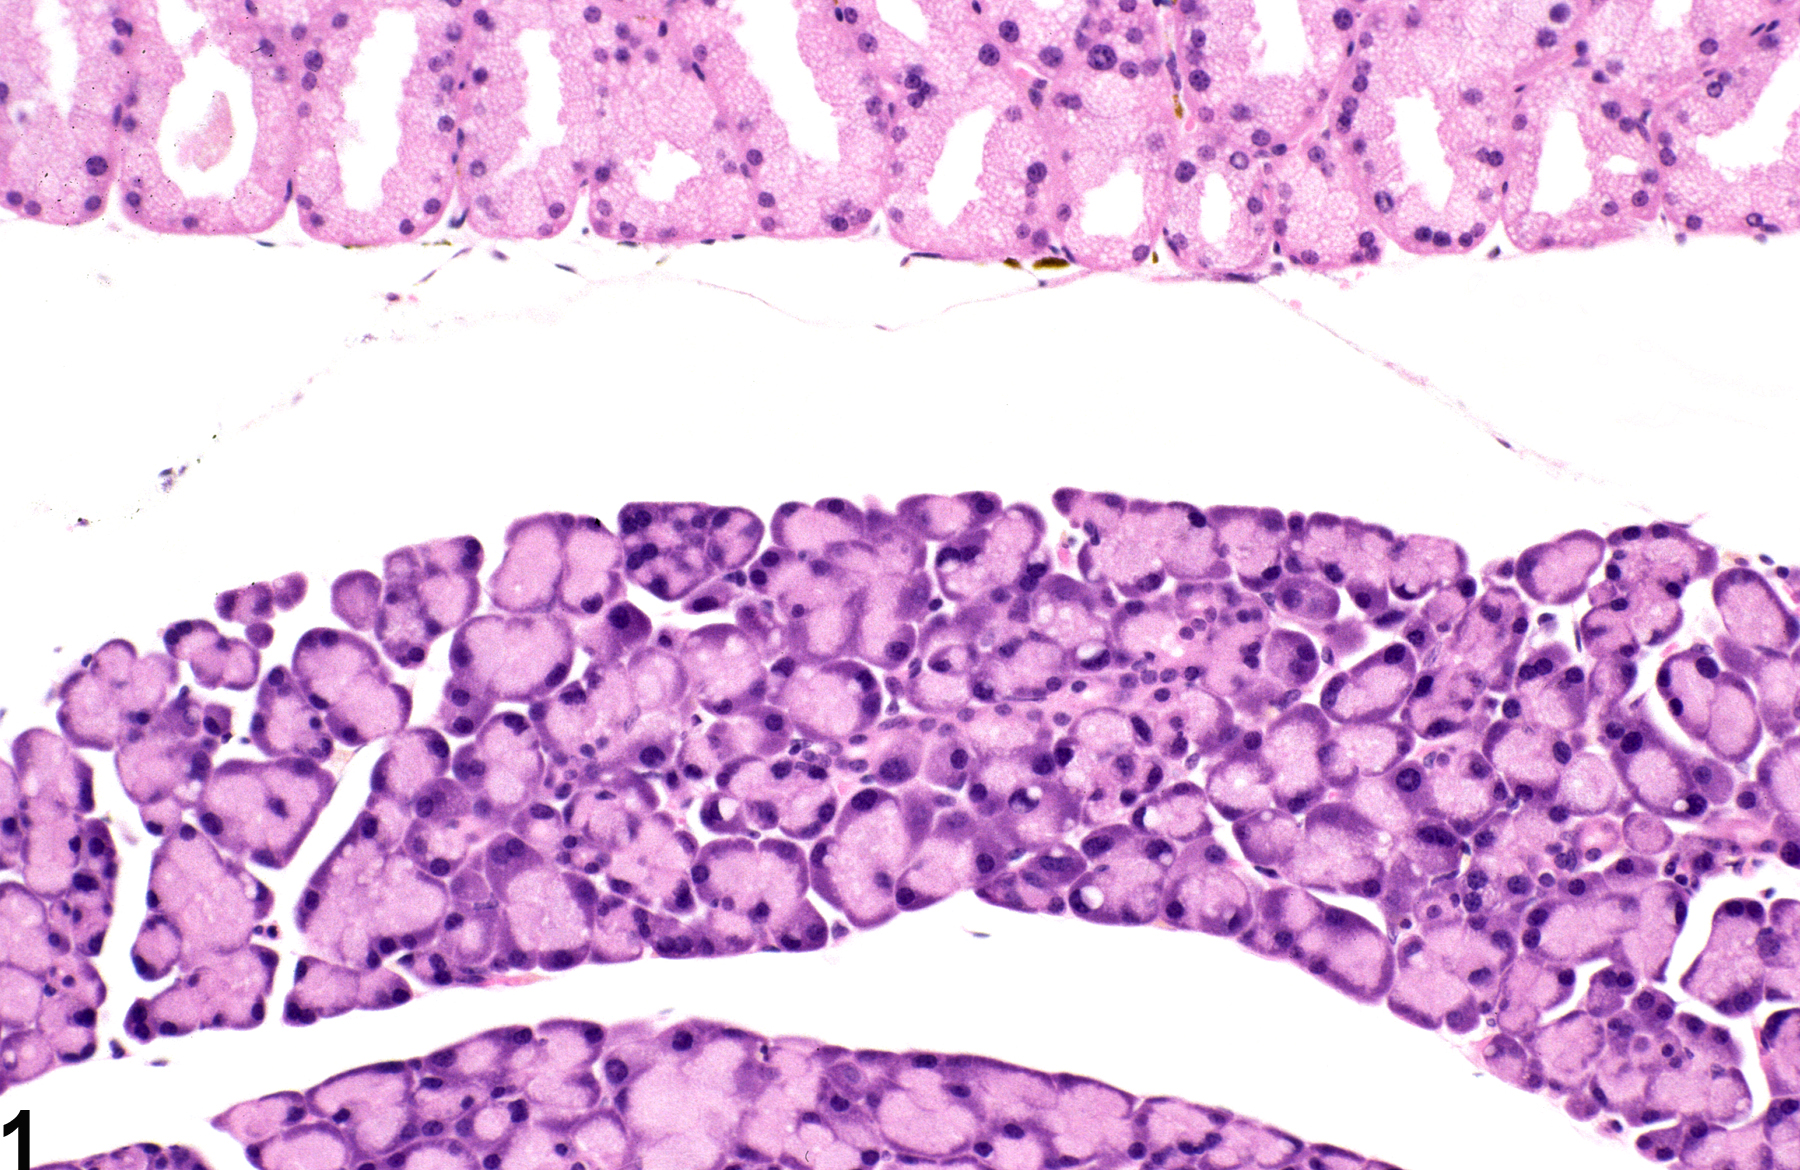 Image of karyomegaly in the lacrimal gland from a male B6C3F1 mouse in a chronic study